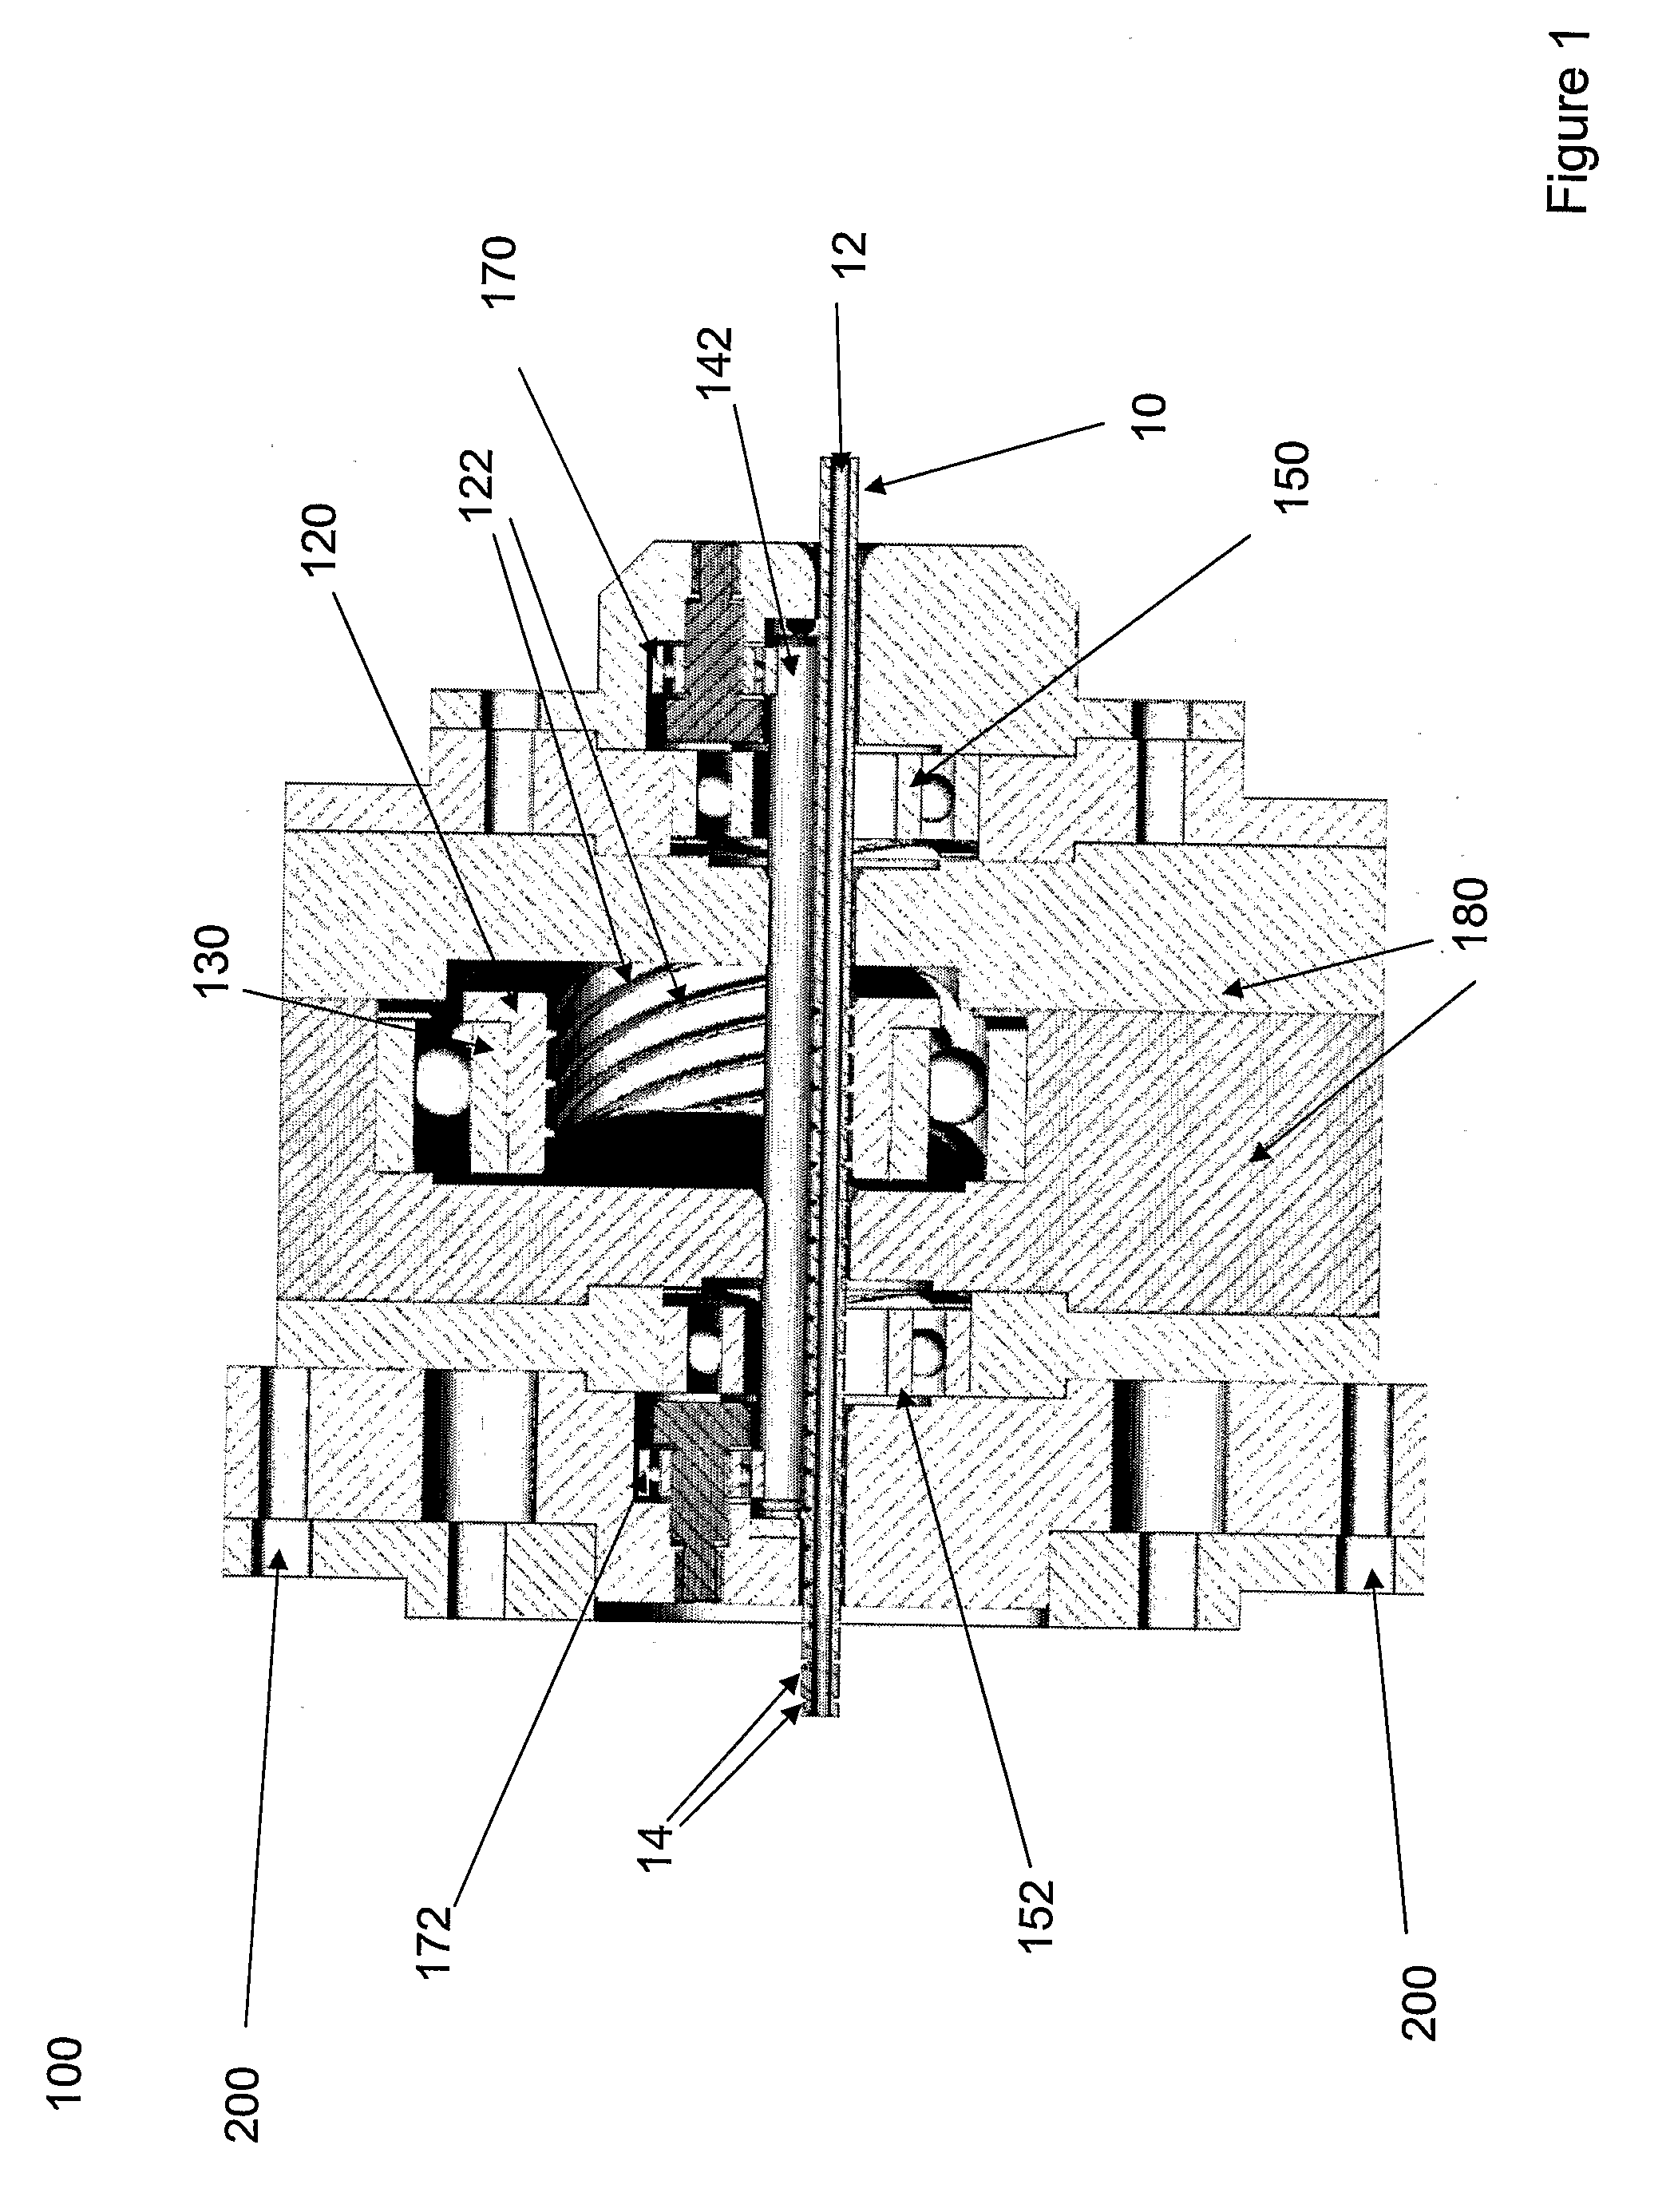 Apparatus and method for forming annular grooves on the outer surface of a cable or tube